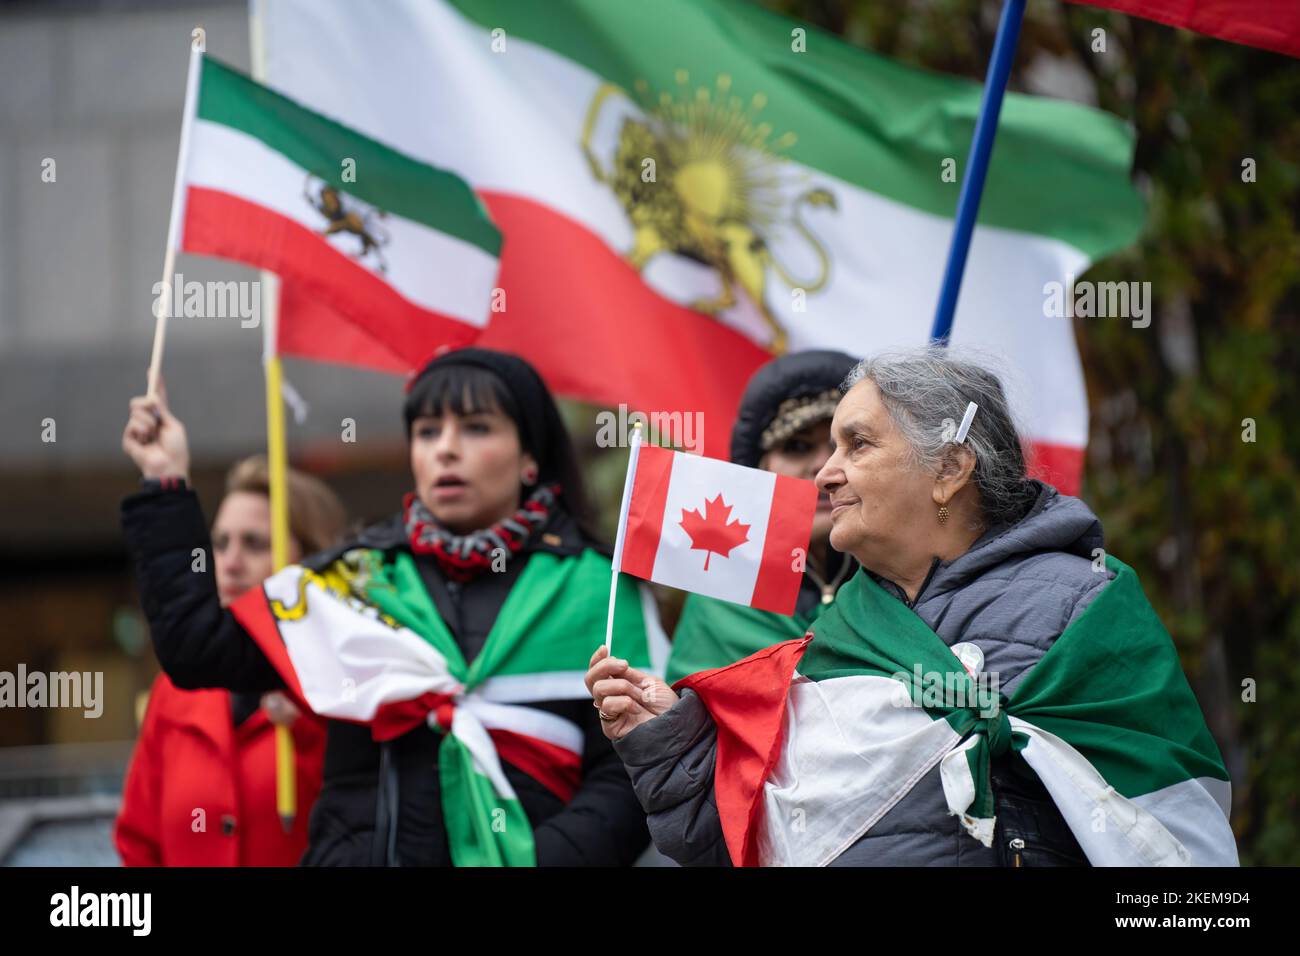 An older woman draped in an Iranian shir-o-khorshid flag holds a Canada flag during a Toronto rally in solidarity with the Iranian people. Stock Photo